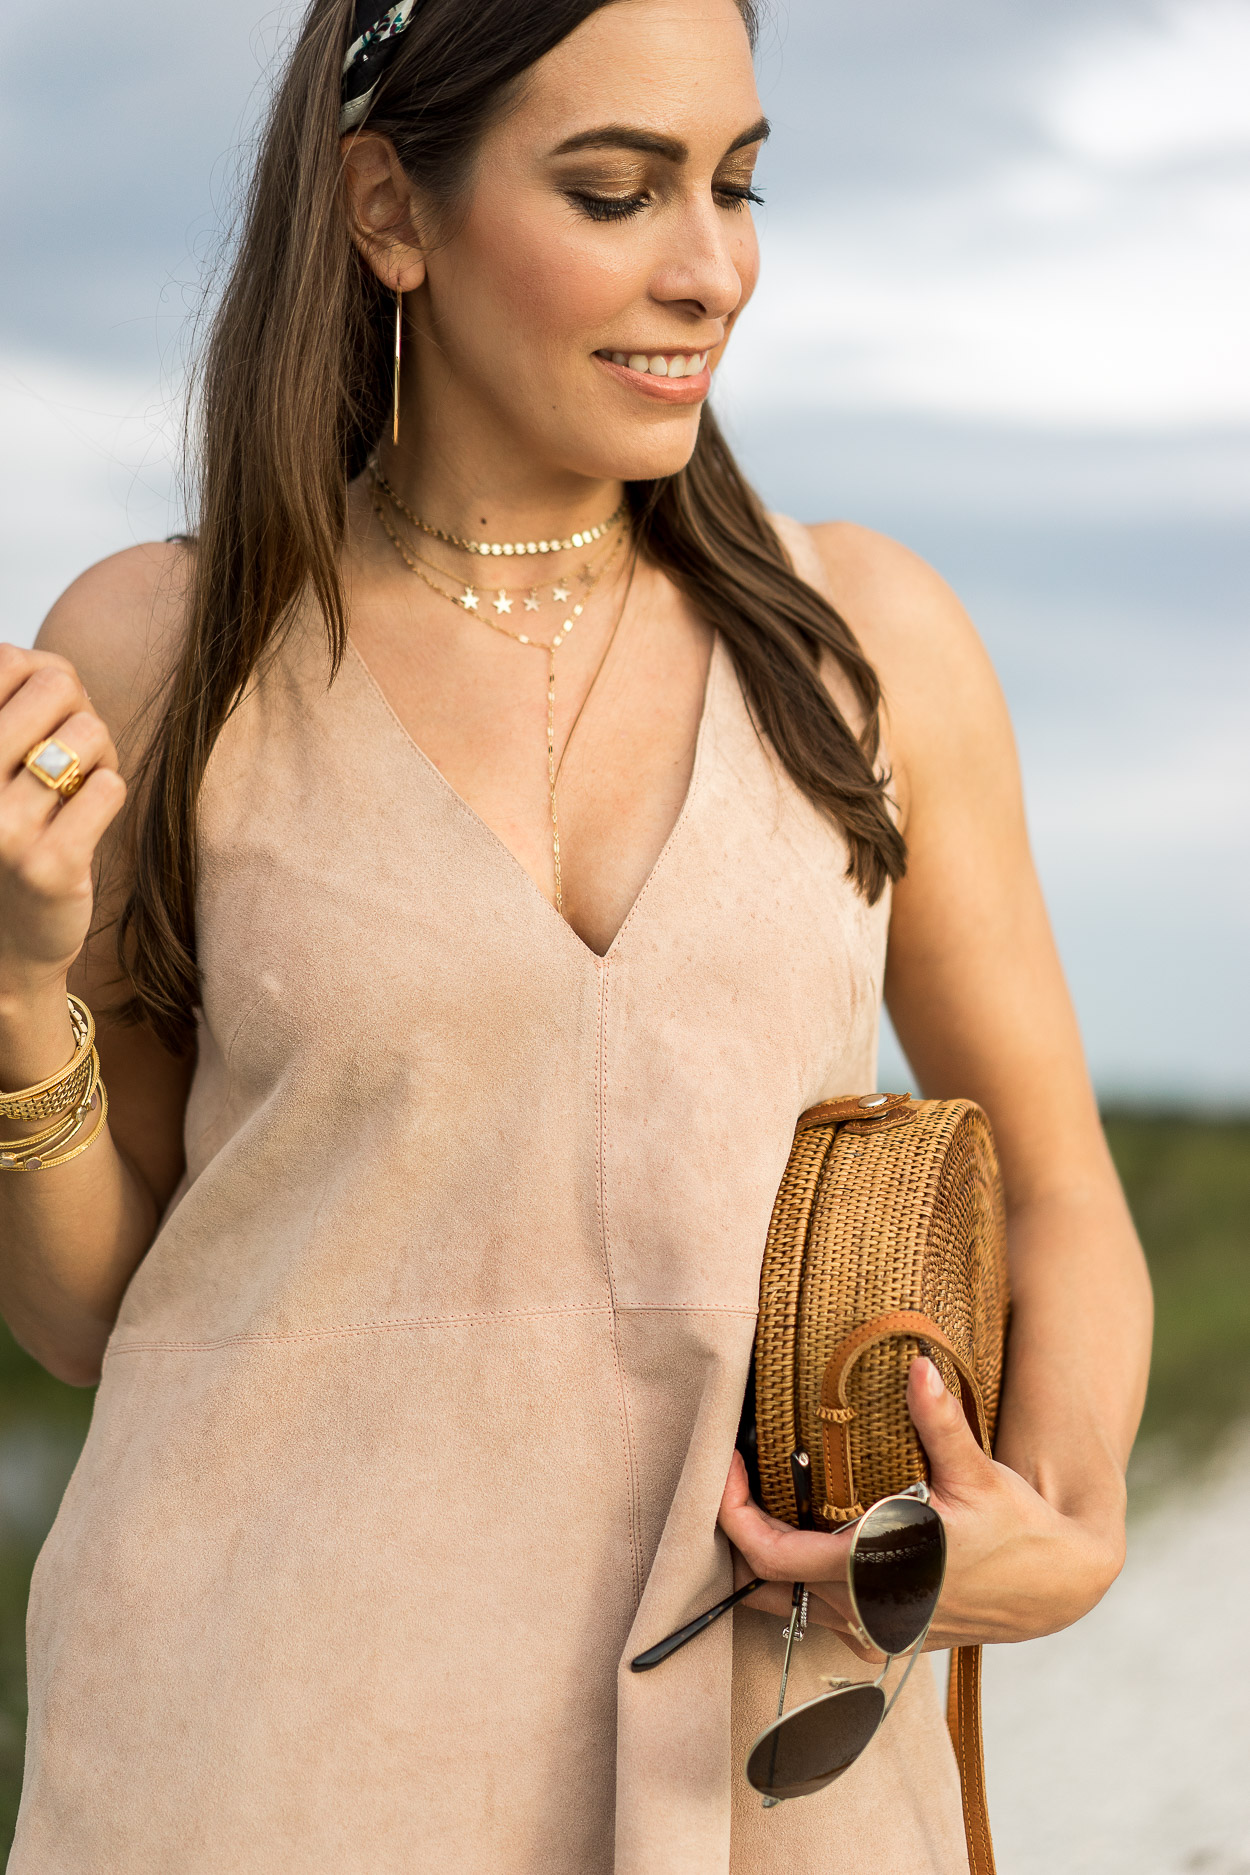 How to wear a suede dress in Summer as shown by South Florida fashion blogger Amanda of AGlamLifestyle